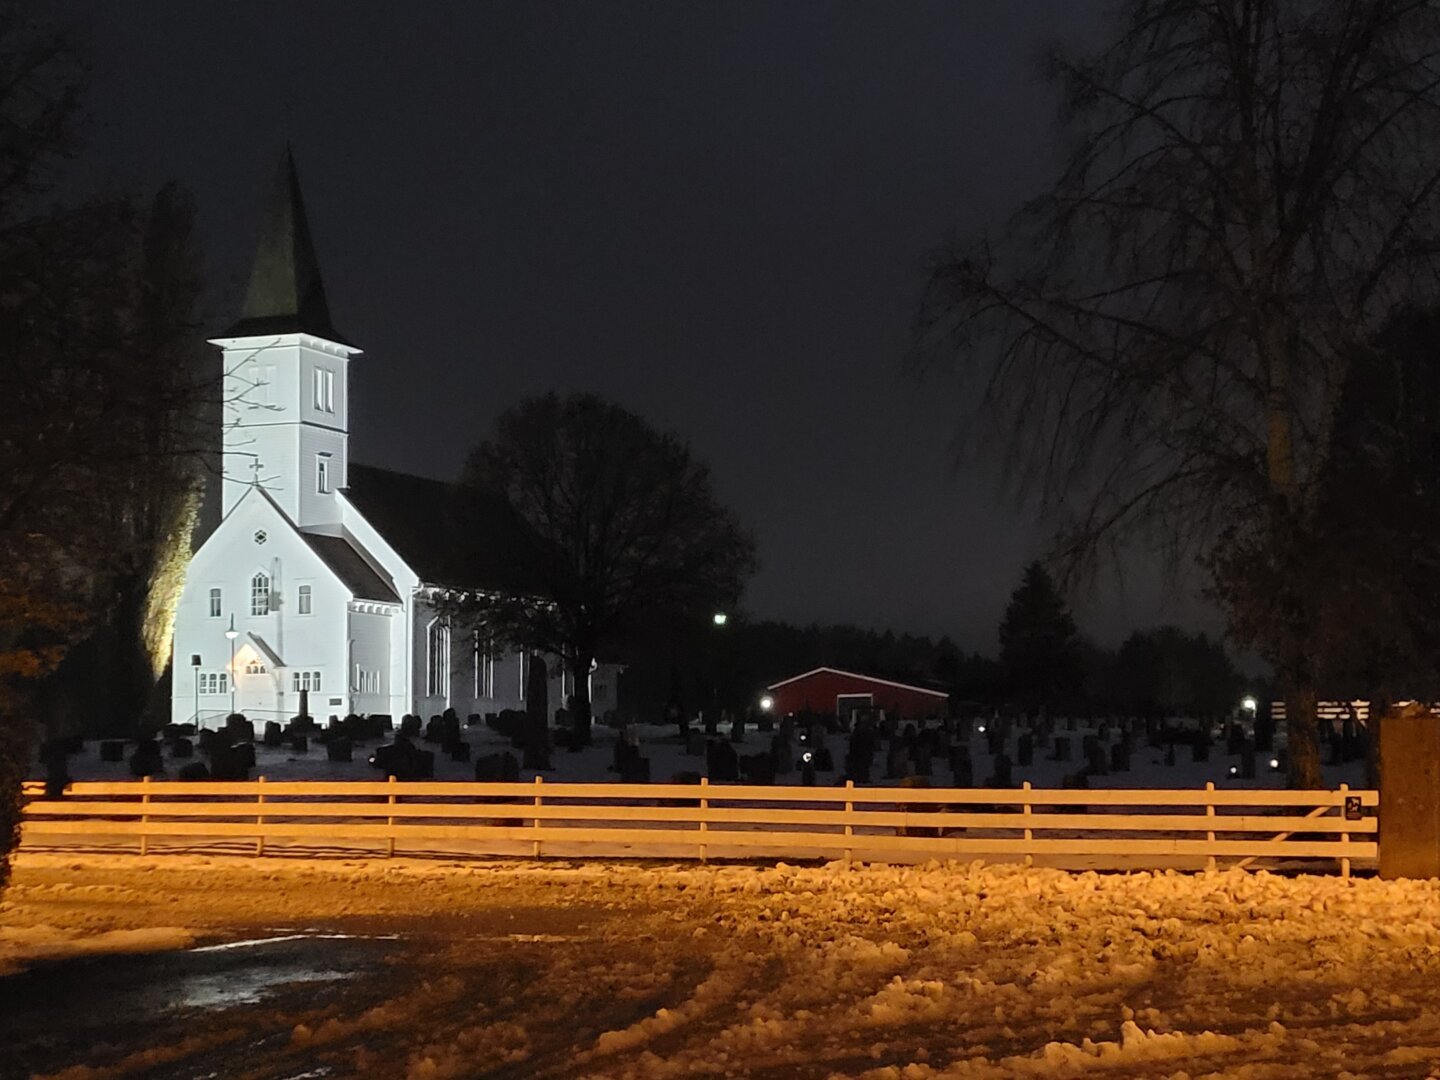 A white church, illuminated in the dark with spotlights, stands in the dark cemetery and appears to glow very white. The contrast is heightened by the fact that the wooden fence and the slush in front of it appear orange-yellow due to the streetlights